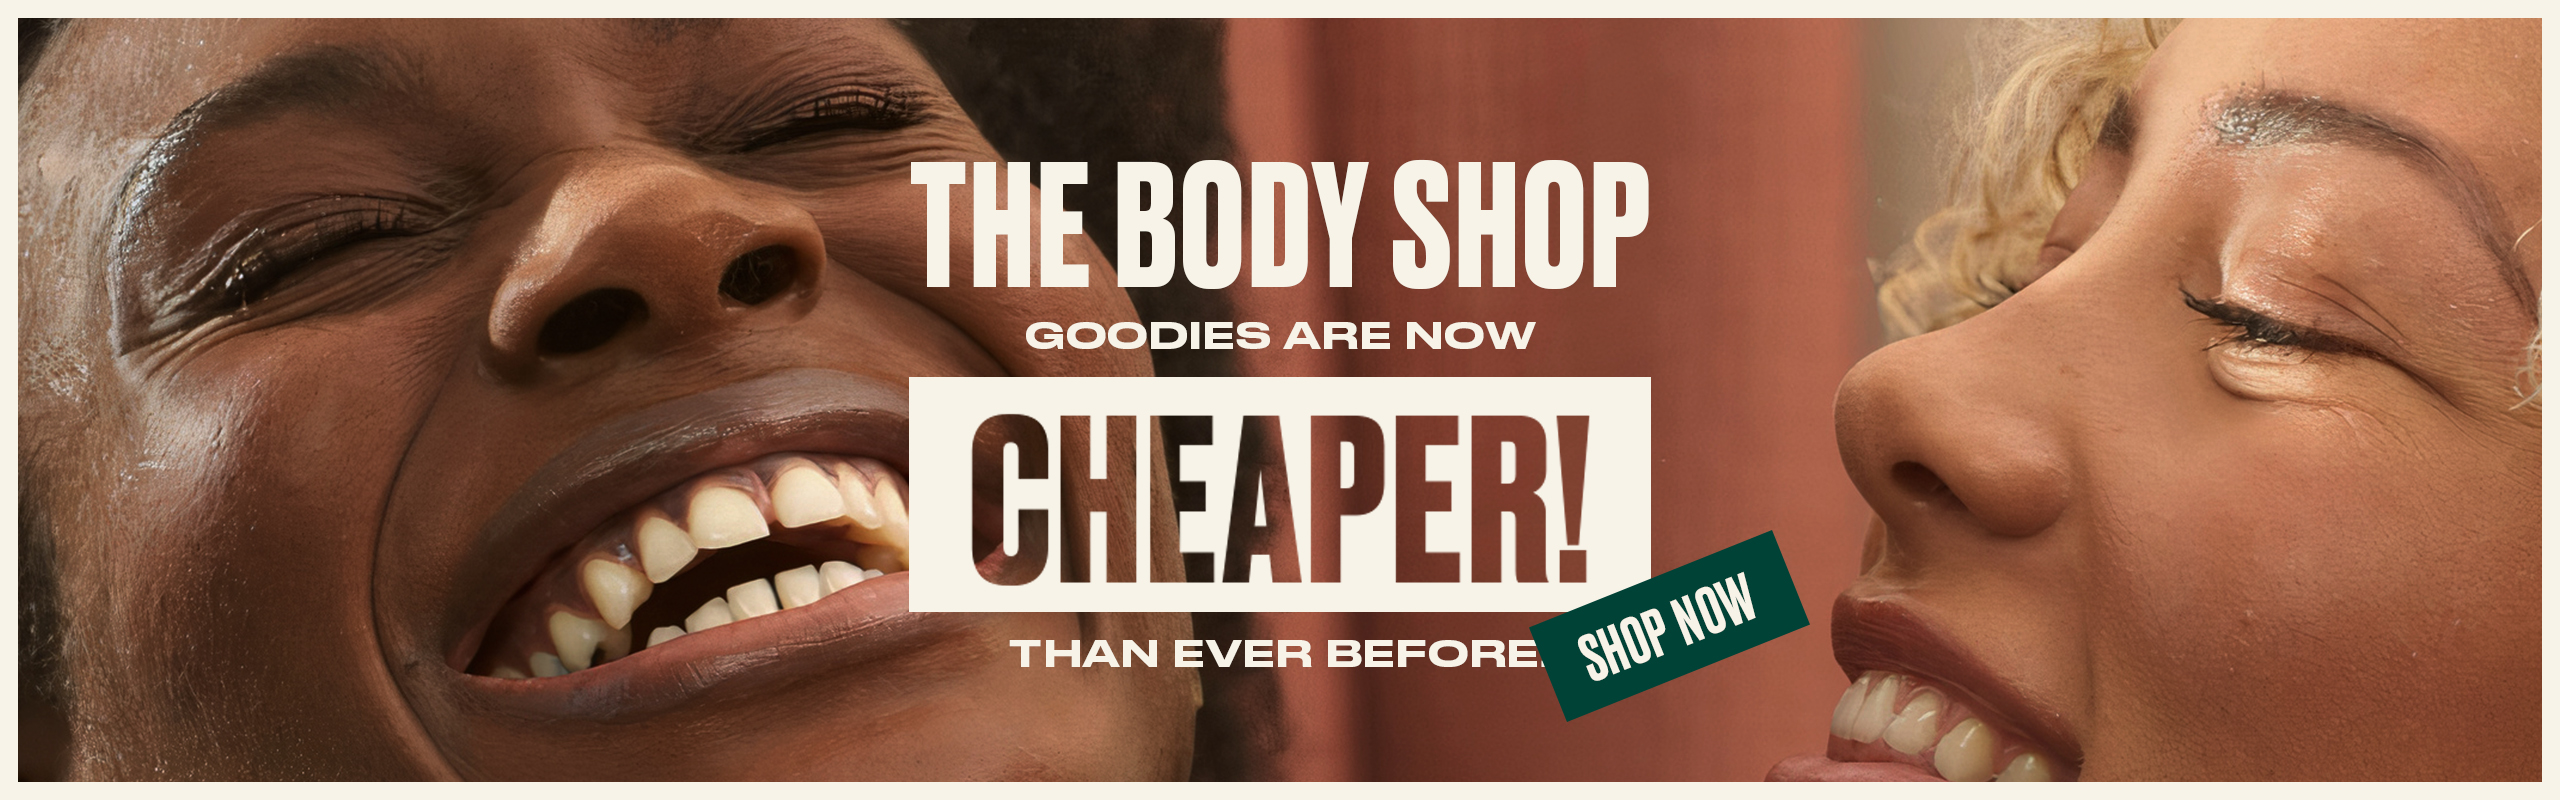 The Body Shop is now cheaper!